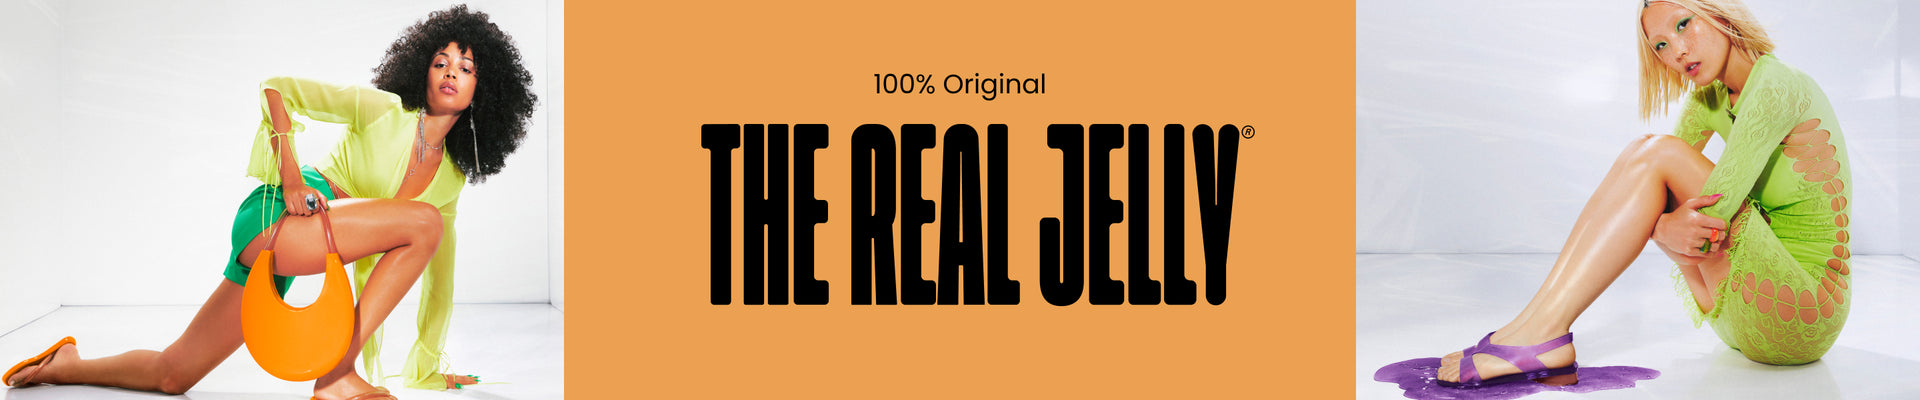 The Real Jelly